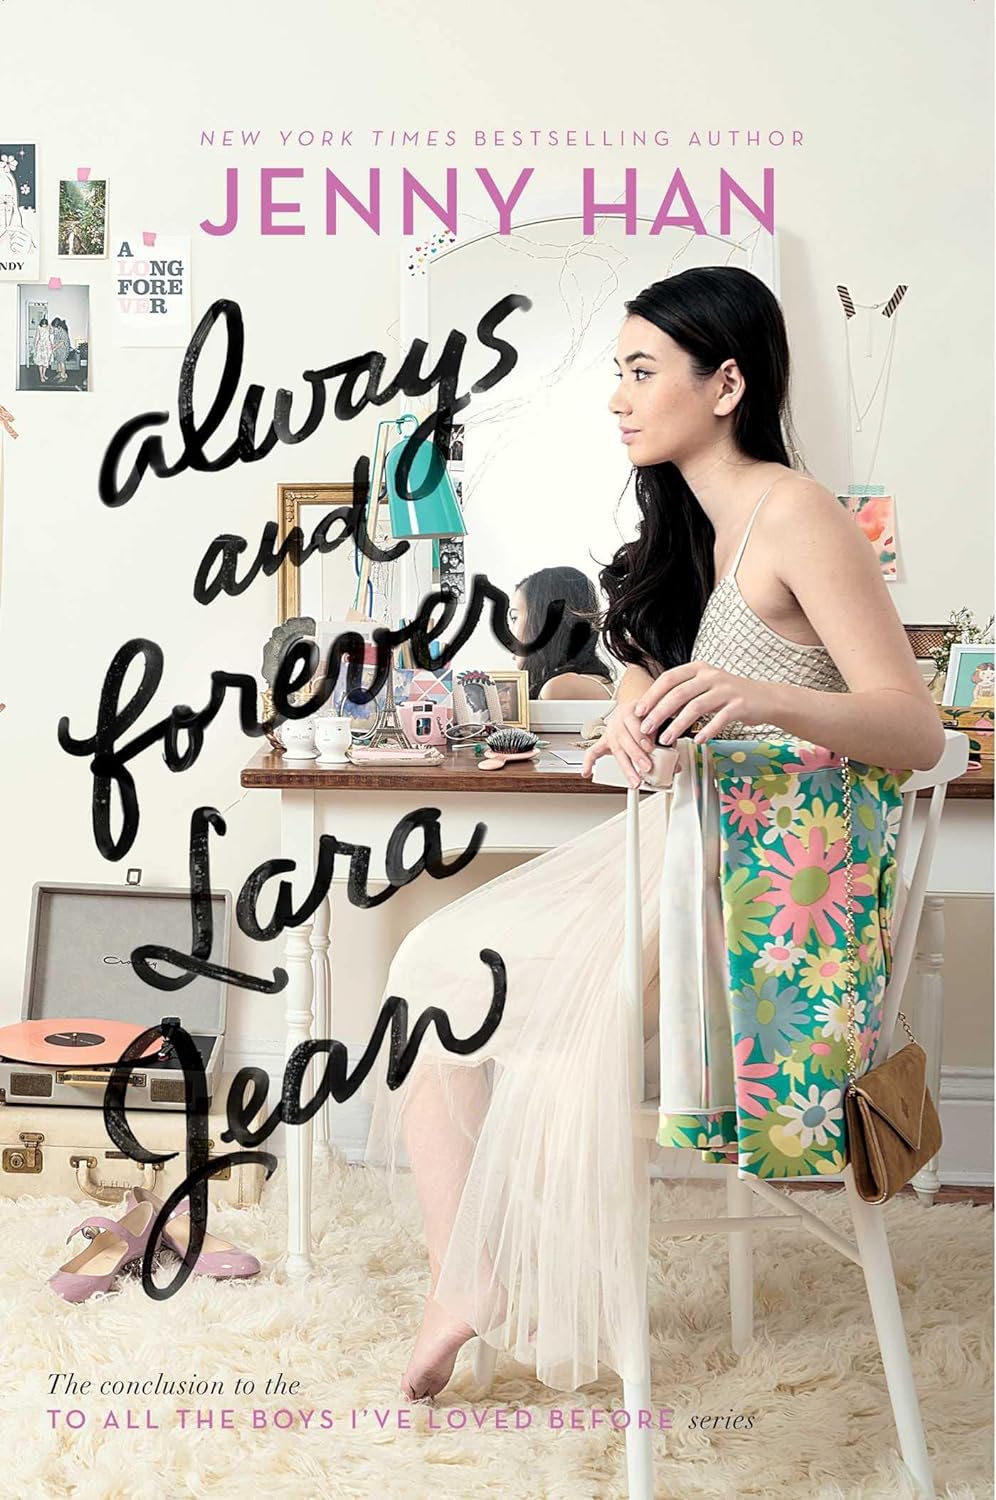 To All the Boys I've Loved Before # 3 : Always and Forever, Lara Jean - Jenny Han